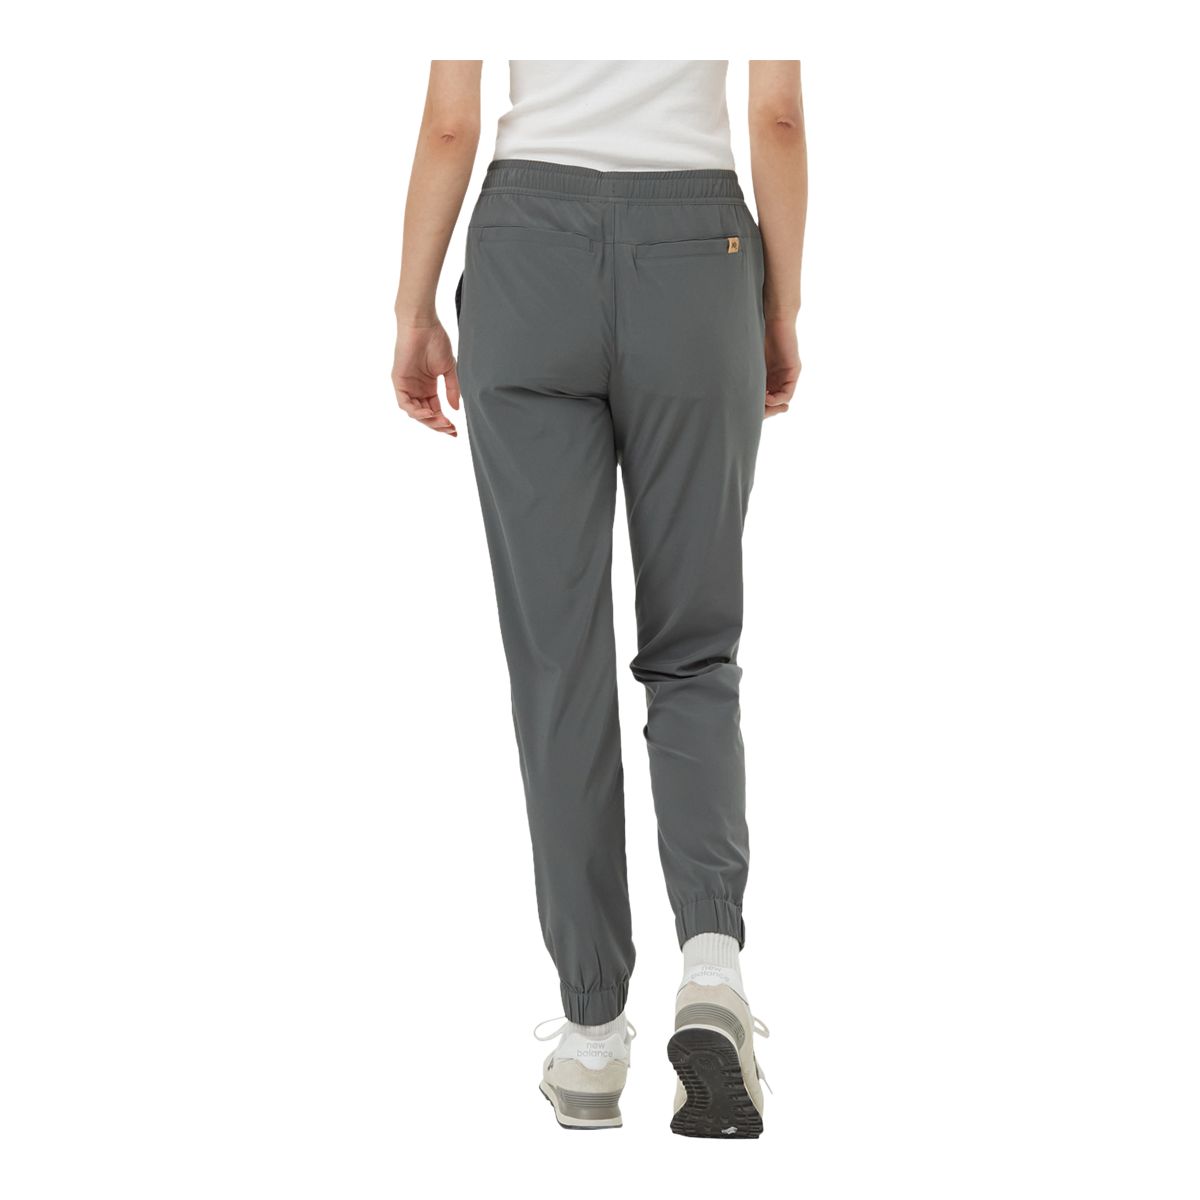 https://media-www.sportchek.ca/product/div-03-softgoods/dpt-72-casual-clothing/sdpt-02-womens/334189428/tentree-women-s-inmotion-pacific-jogger-pants-bf0214a6-71c4-4b20-b62f-3e3133ab9477-jpgrendition.jpg?imdensity=1&imwidth=1244&impolicy=mZoom